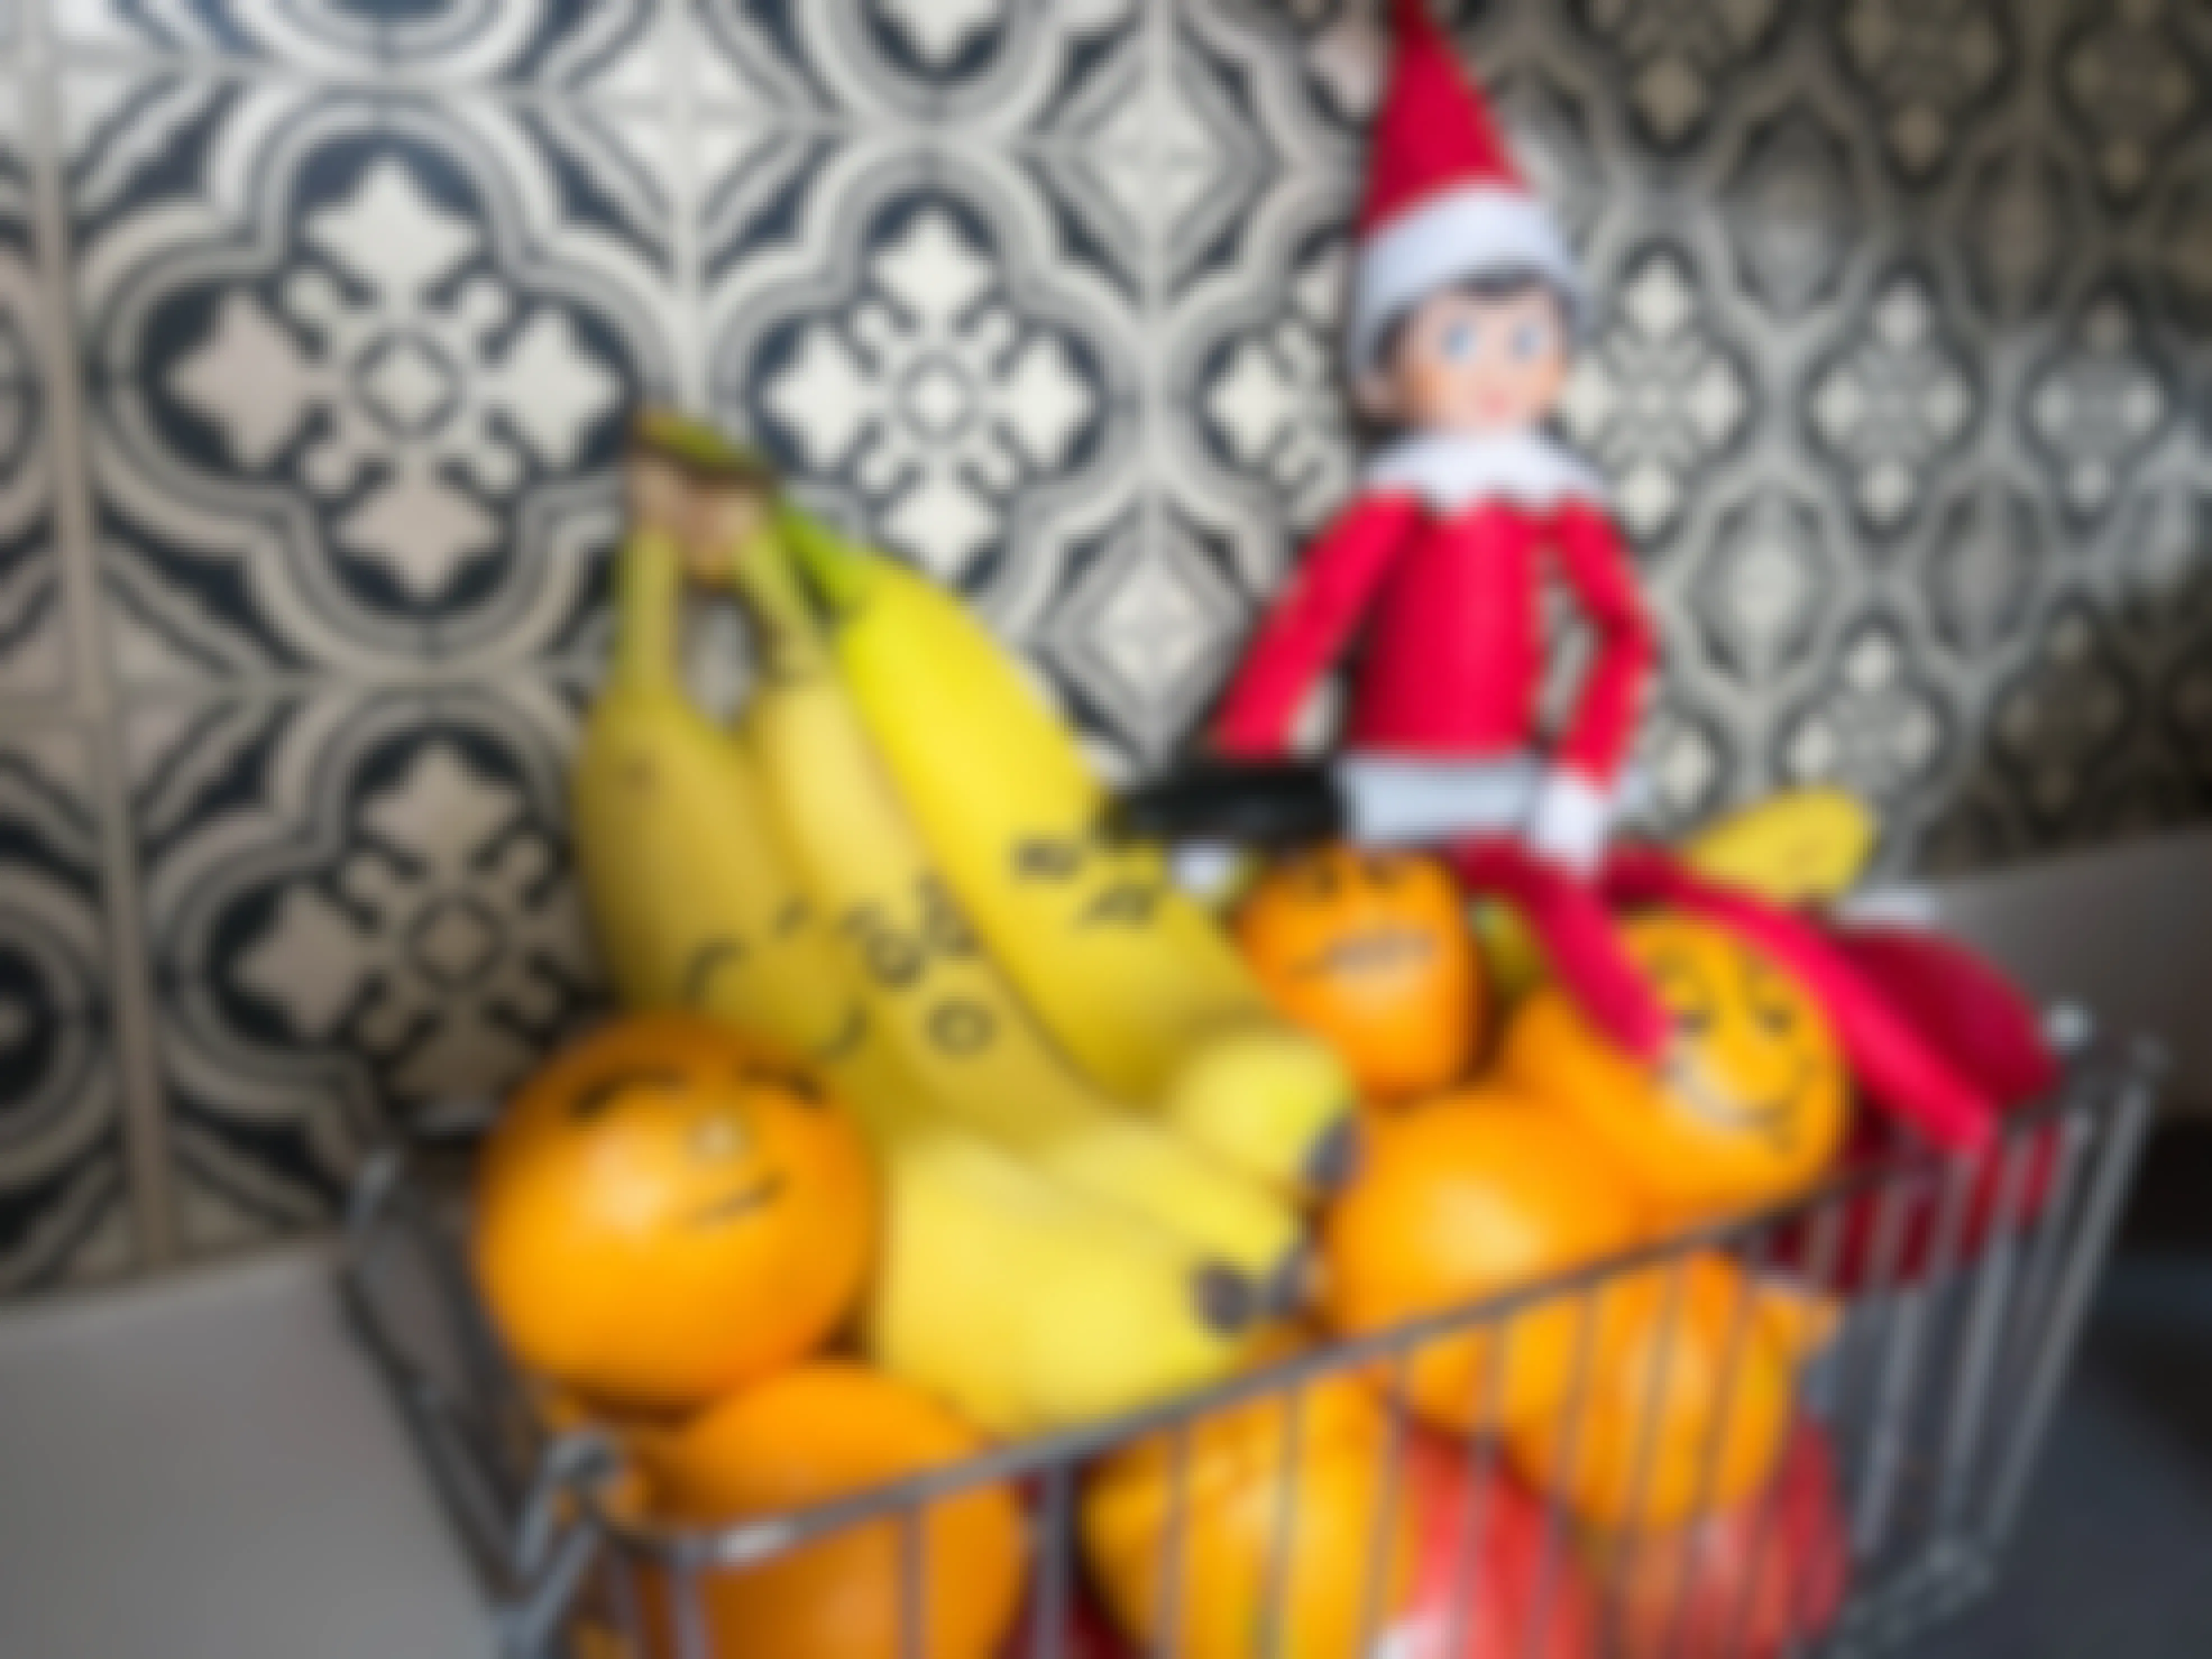 an elf on the shelf doll holding sharpie with faces marked on bananas and oranges in a basket of fruit 